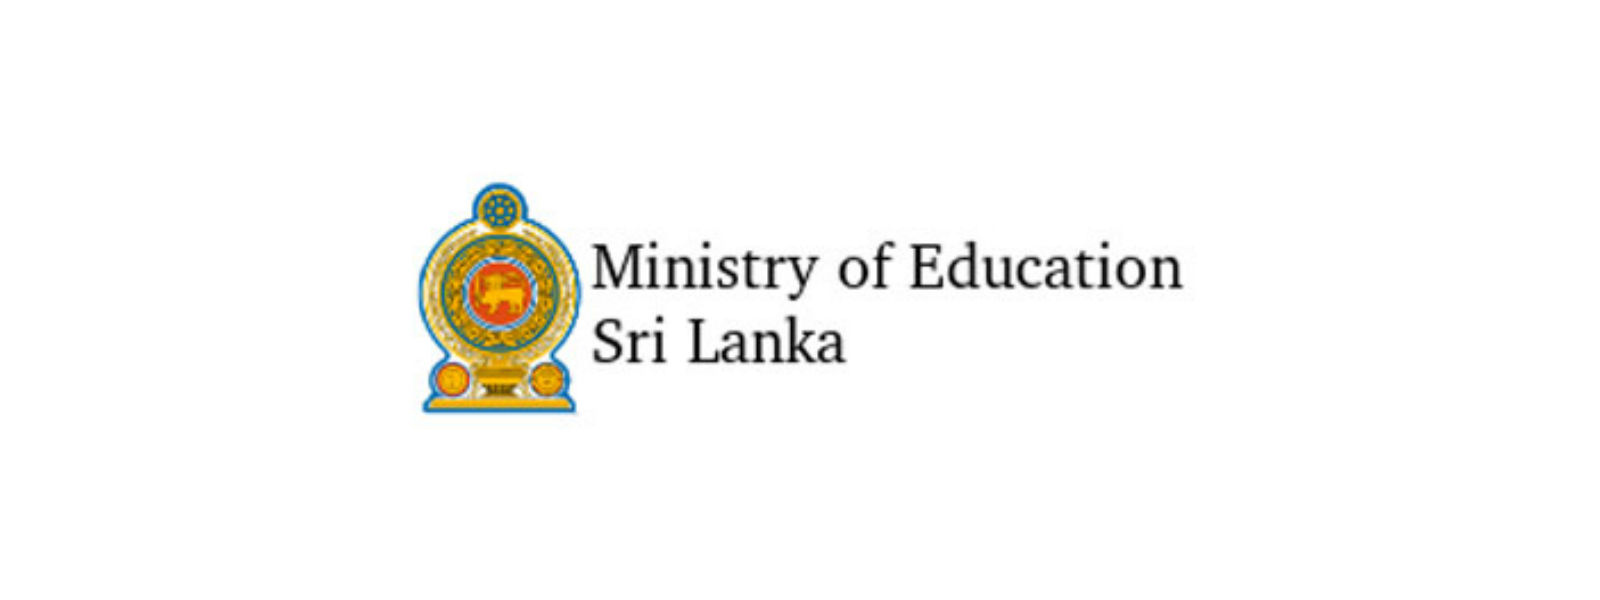 Ministry of Education to issue a special circular containing instructions on how to protect schools from COVID-19 when they are opened